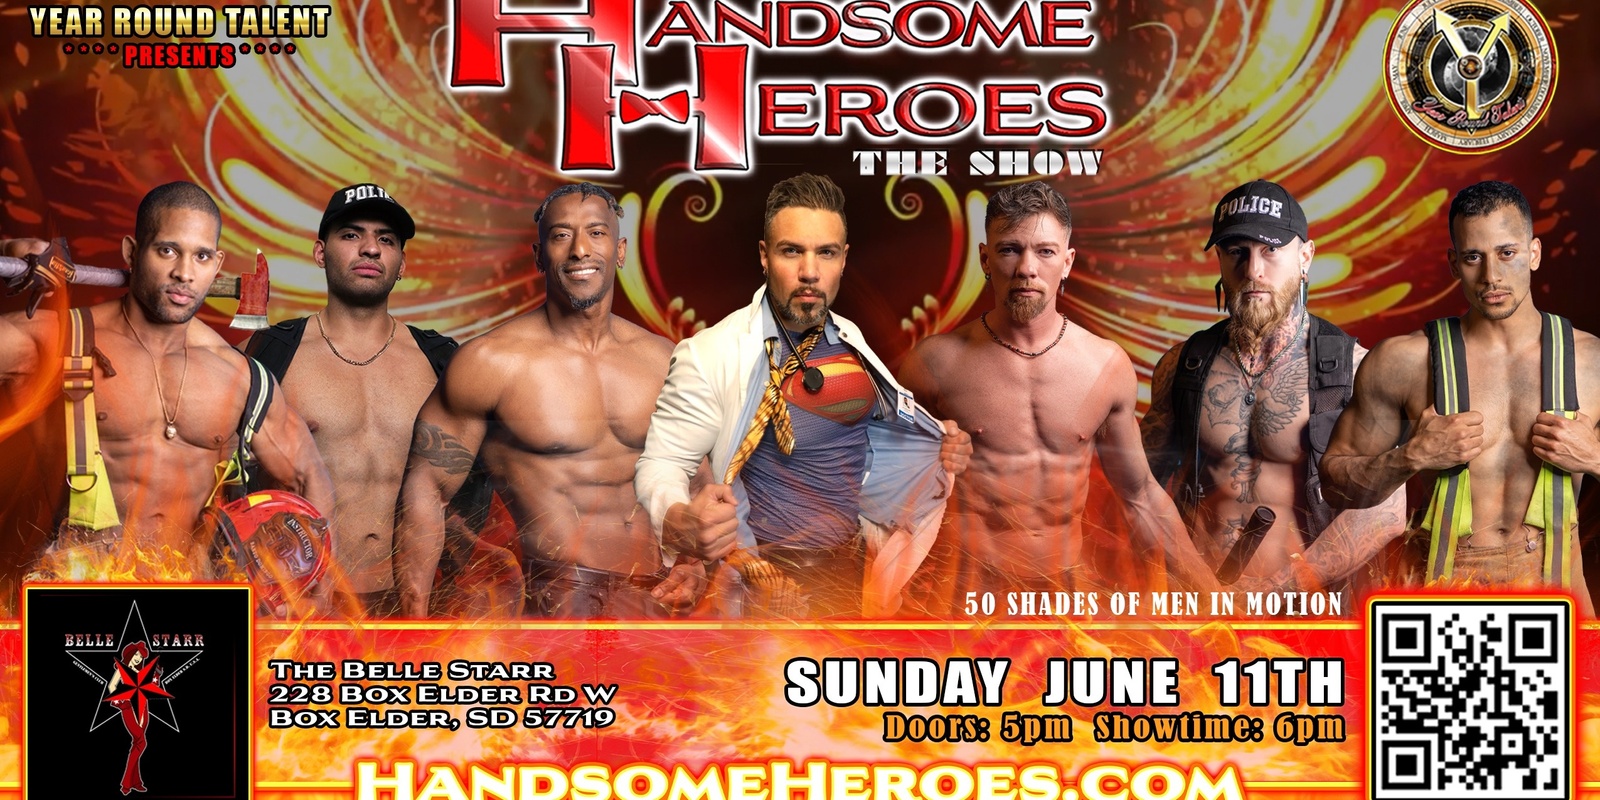 Box Elder, SD - Handsome Heroes The Show: The Best Ladies Night' Out of All Time!